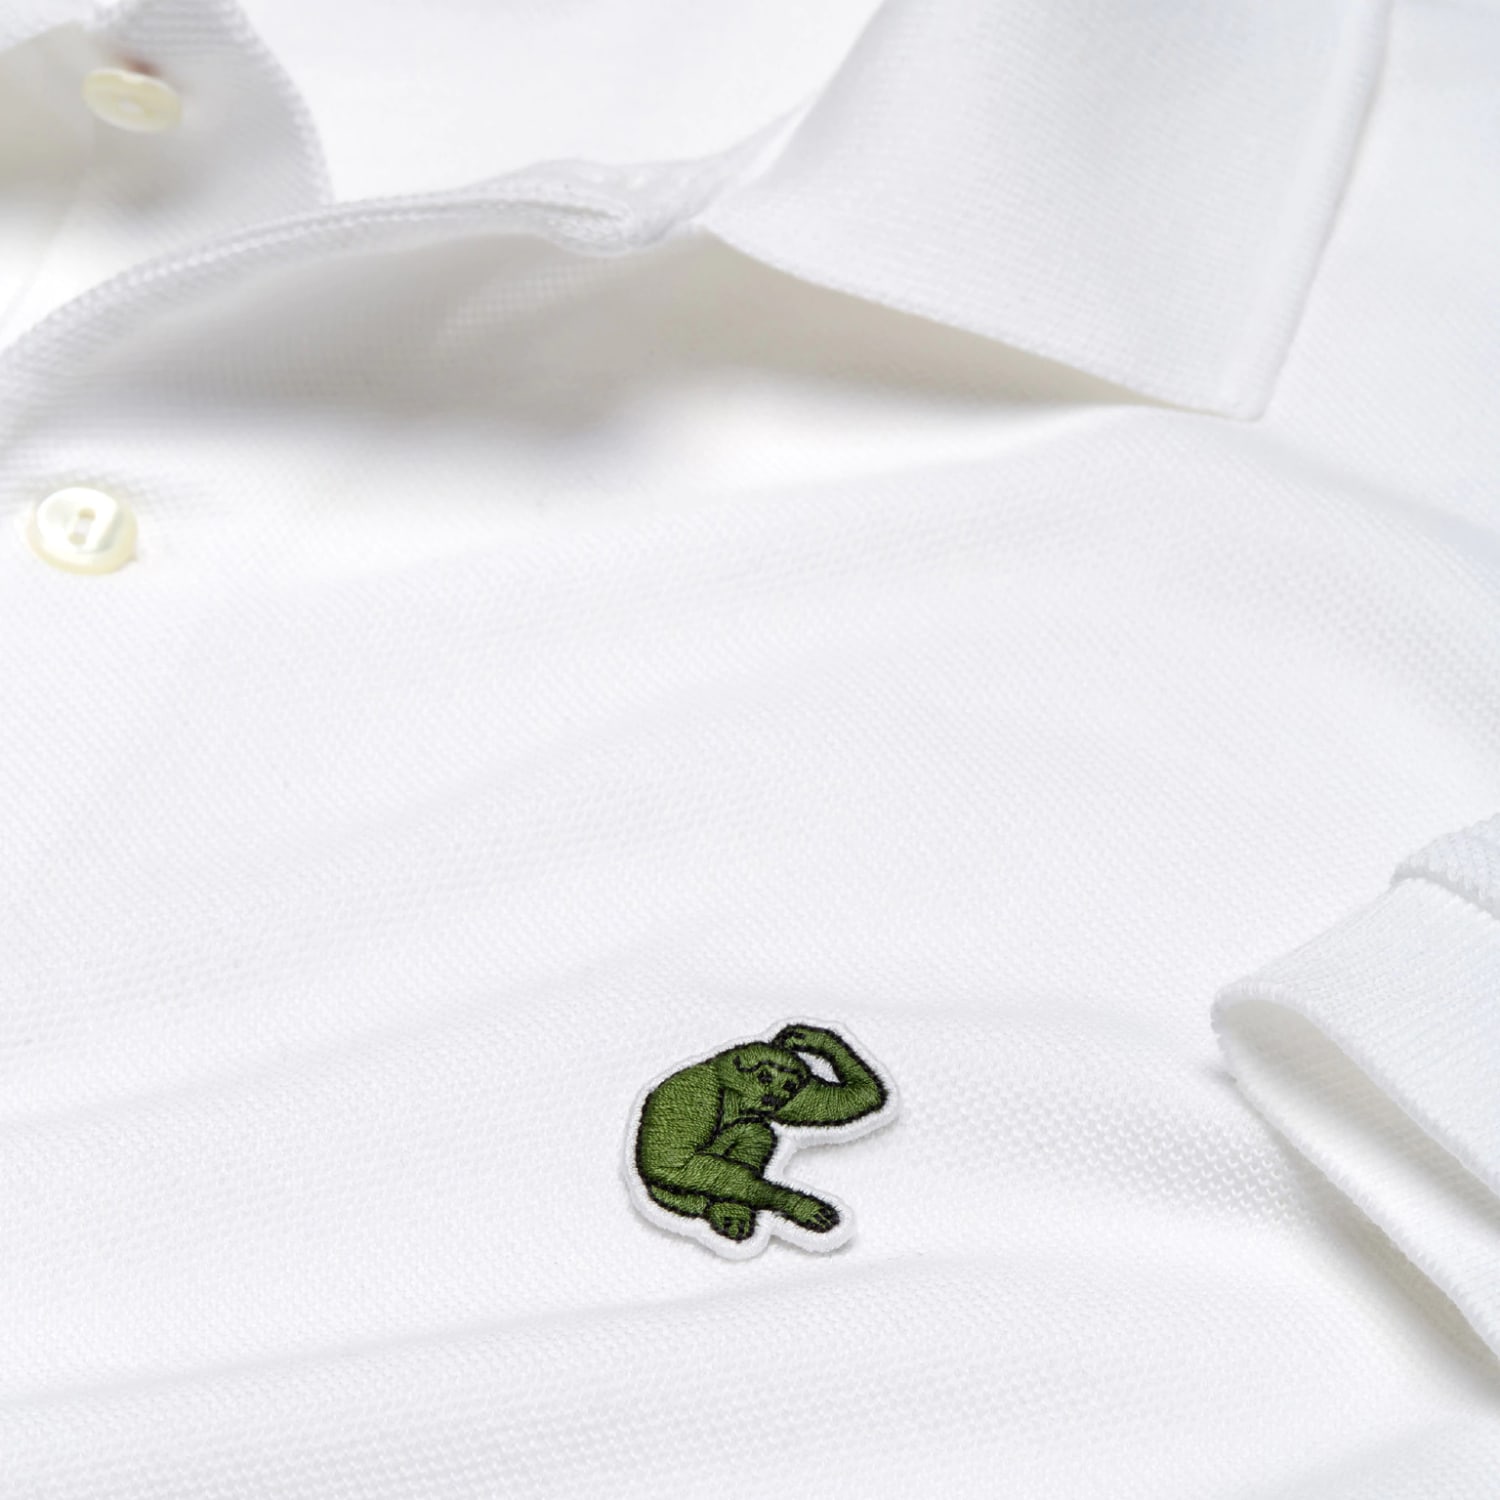 kedelig Støv Cruelty Lacoste replaces crocodile logo with endangered species